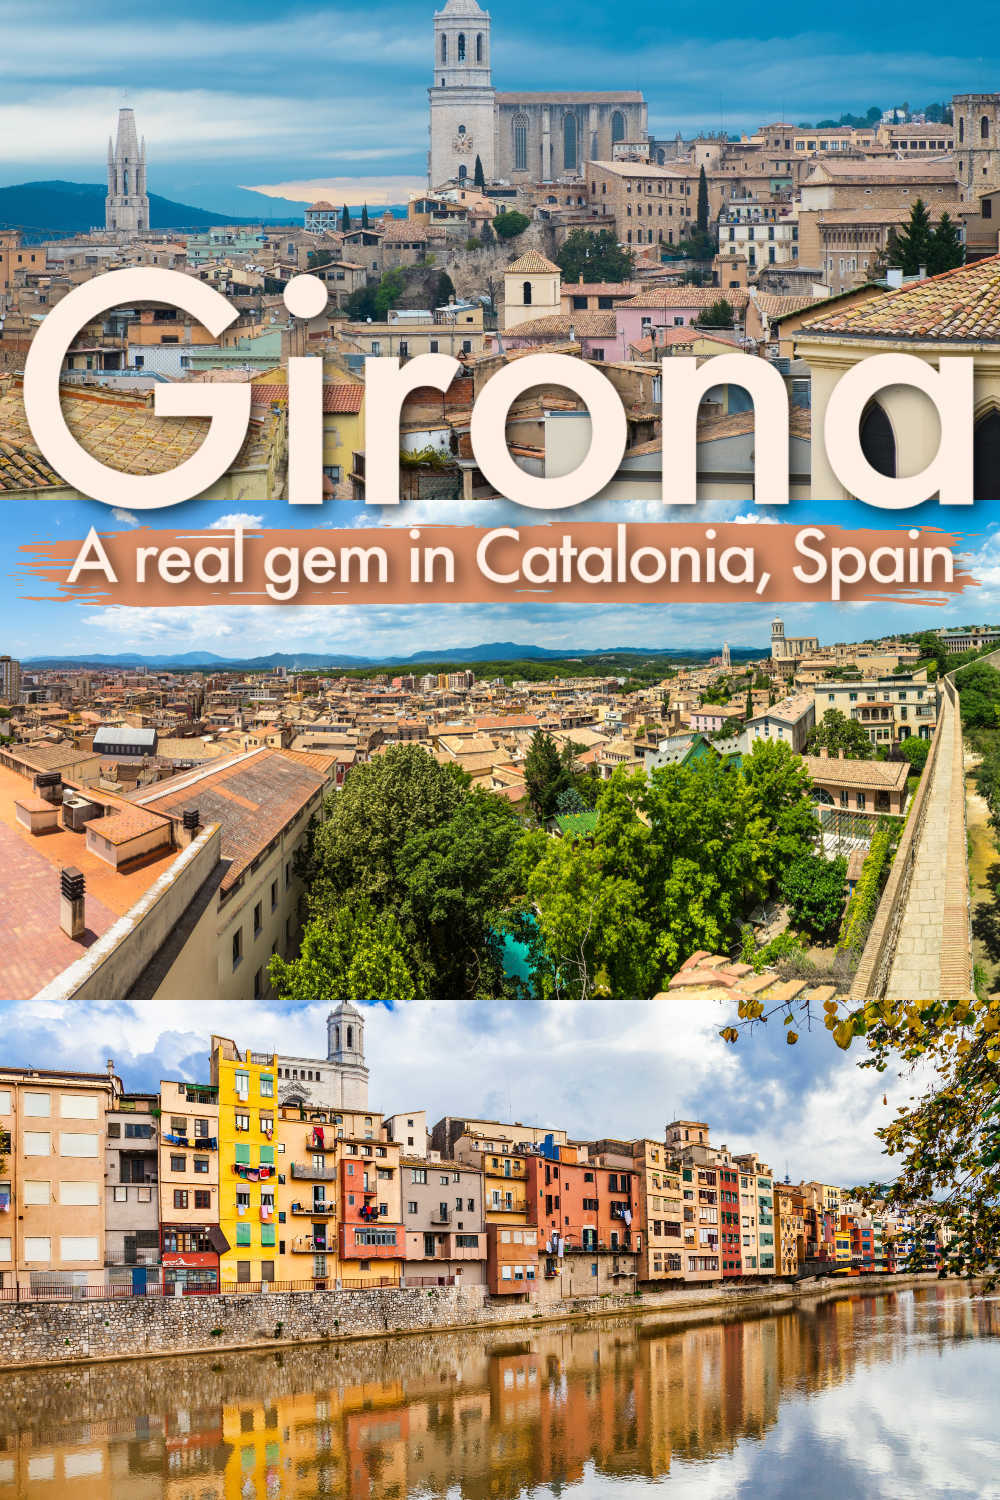 Girona is one of the most beautiful cities in Catalonia, Spain, and it's worth visiting. Here is a guide to the best things to do in Girona, places to visit, Game of Thrones filming locations, and travel tips. If you are in doubt about visiting Girona, this post will convince you to pack your bags and stay in Girona for a couple of days. We listed the attractions in Girona, hotels, the best places to stay, and how to get there.